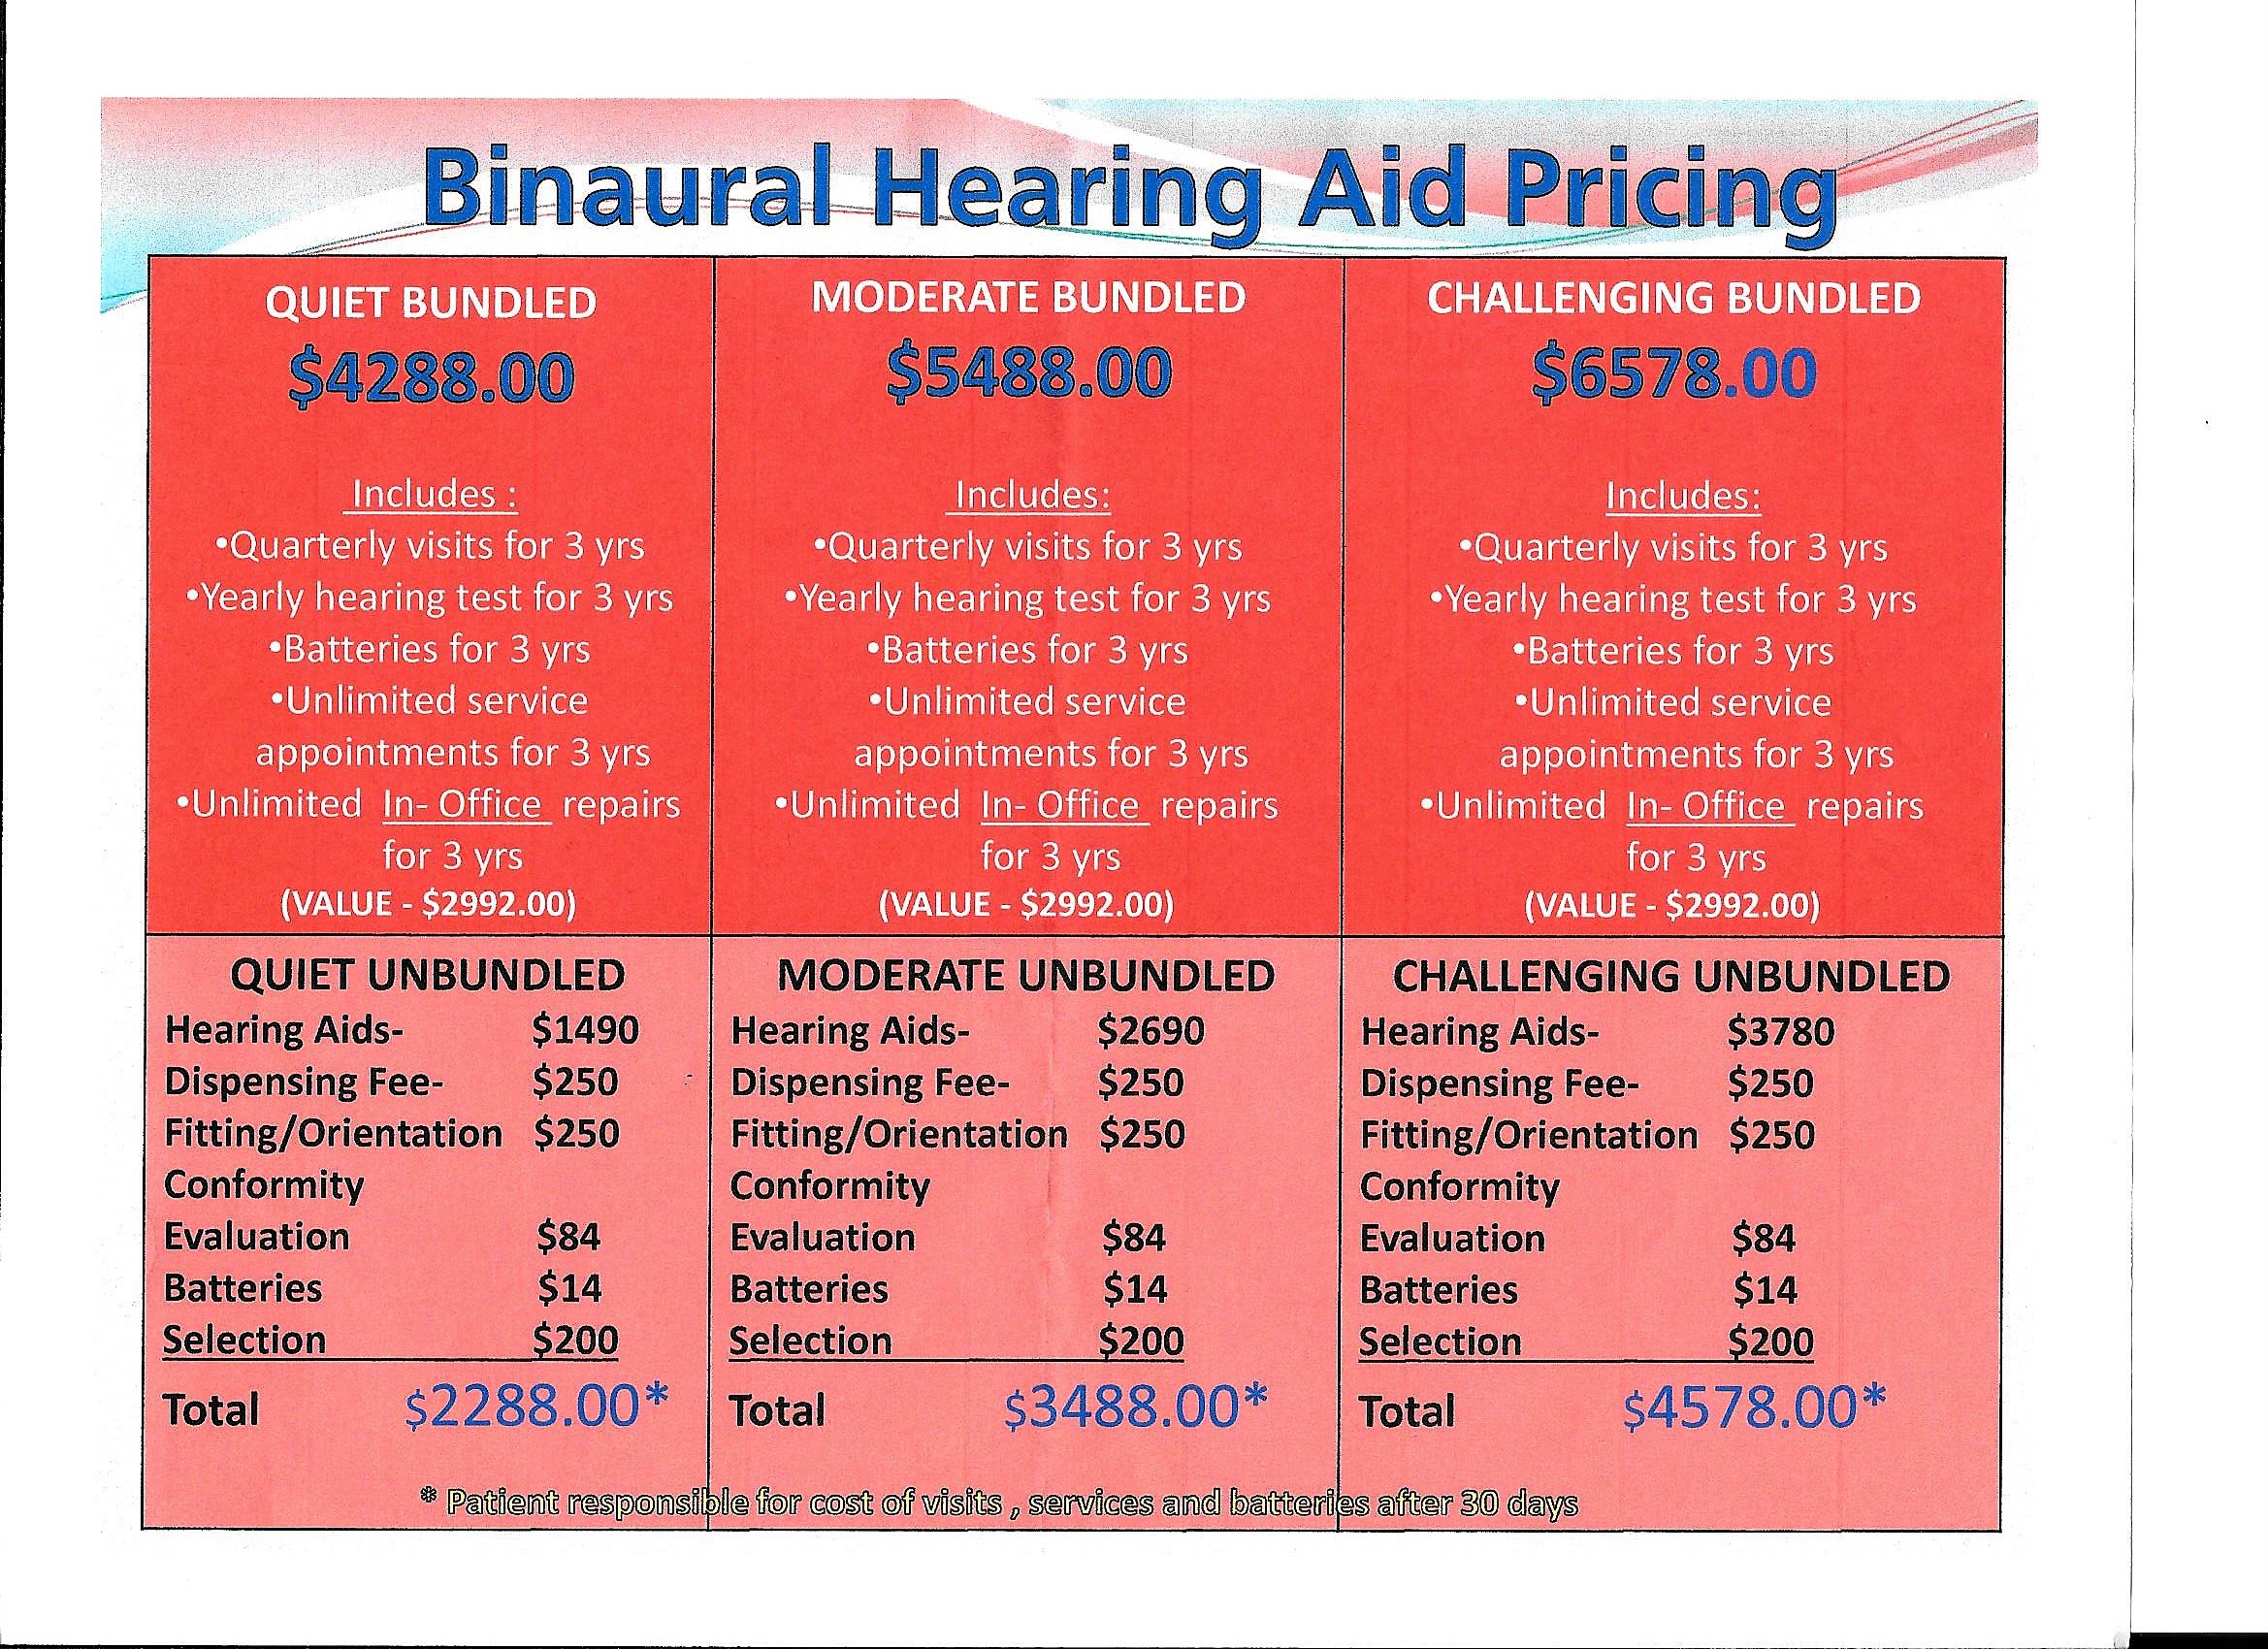 This sheet was given to me by a local audiologist who is one of Amplifon's providers.  The Challenging Unbundled is the Oticon OPN1 (Premium) left and right hearing aids is the price on the hearing ai